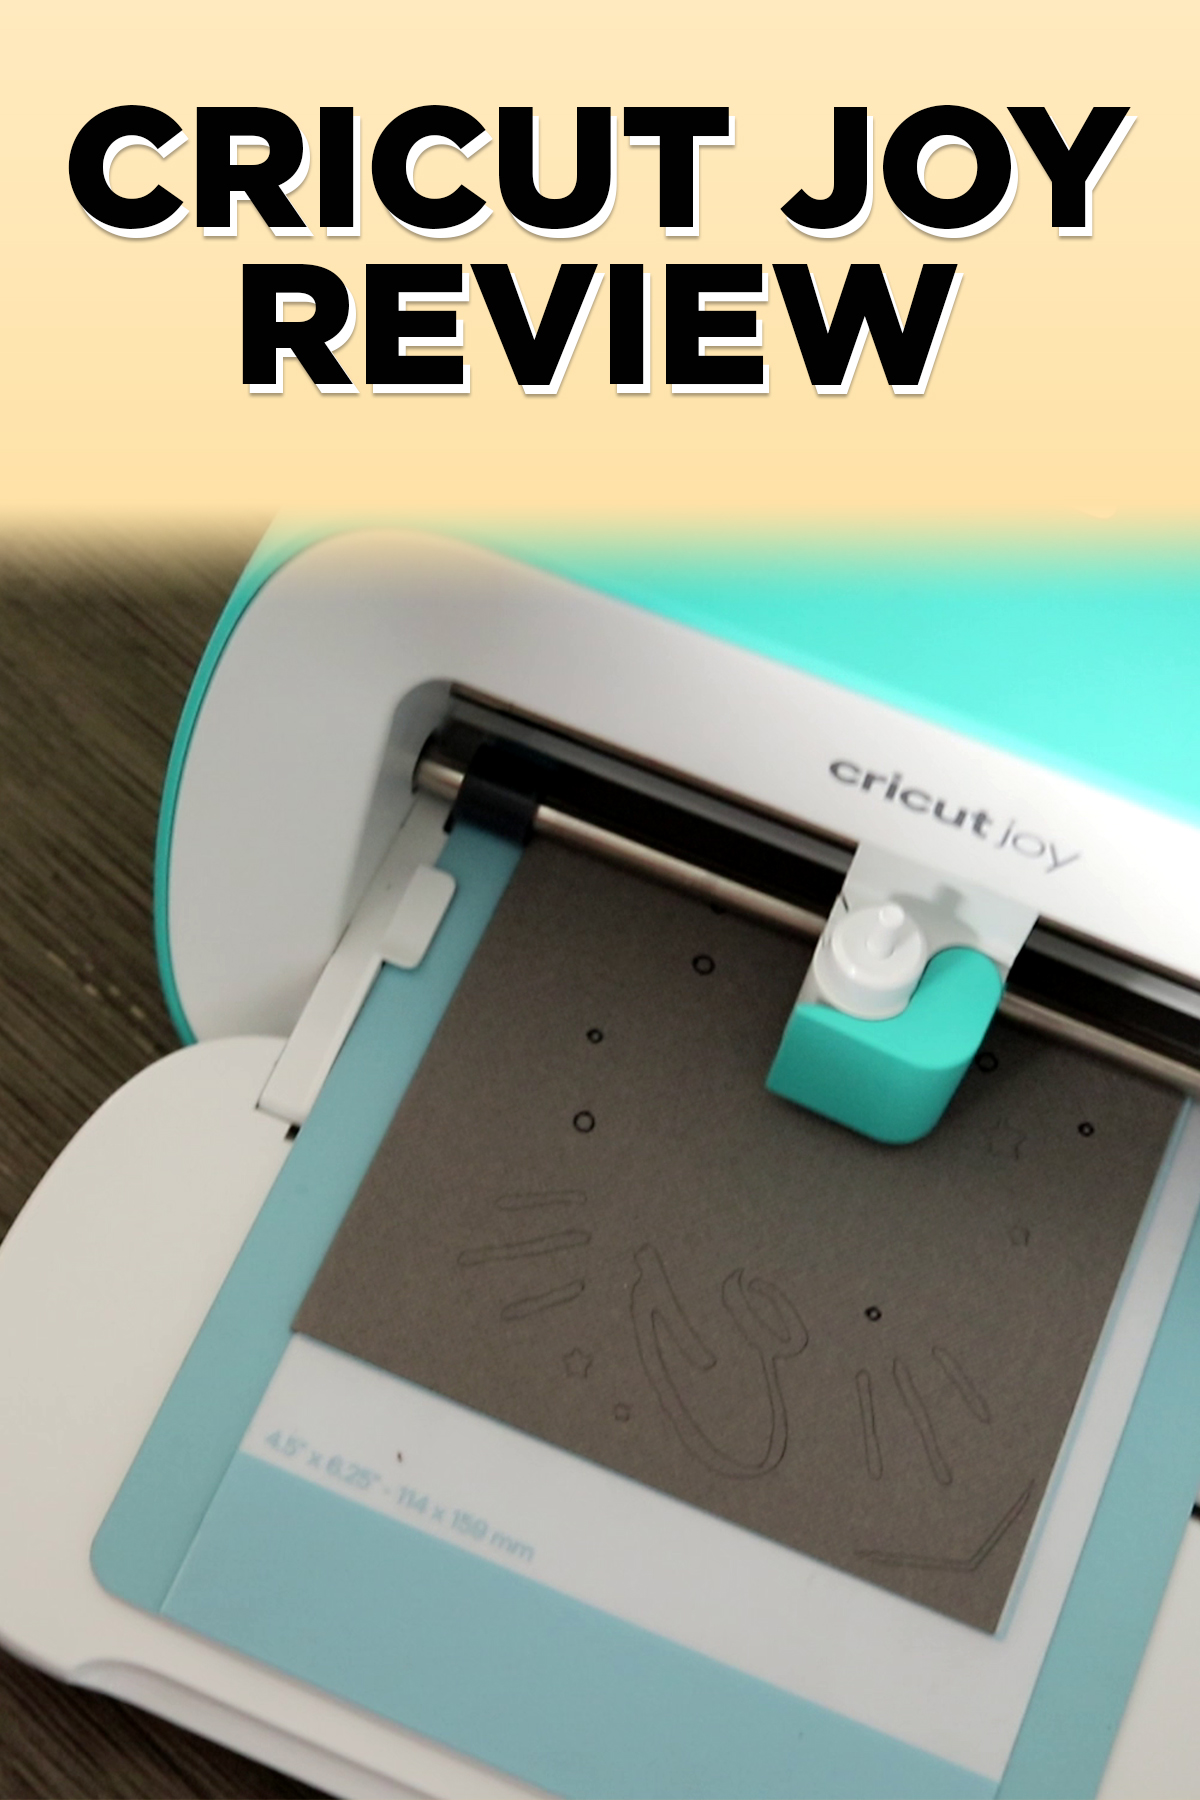 Cricut Joy Materials and Accessories That You'll Need Story - Abbi